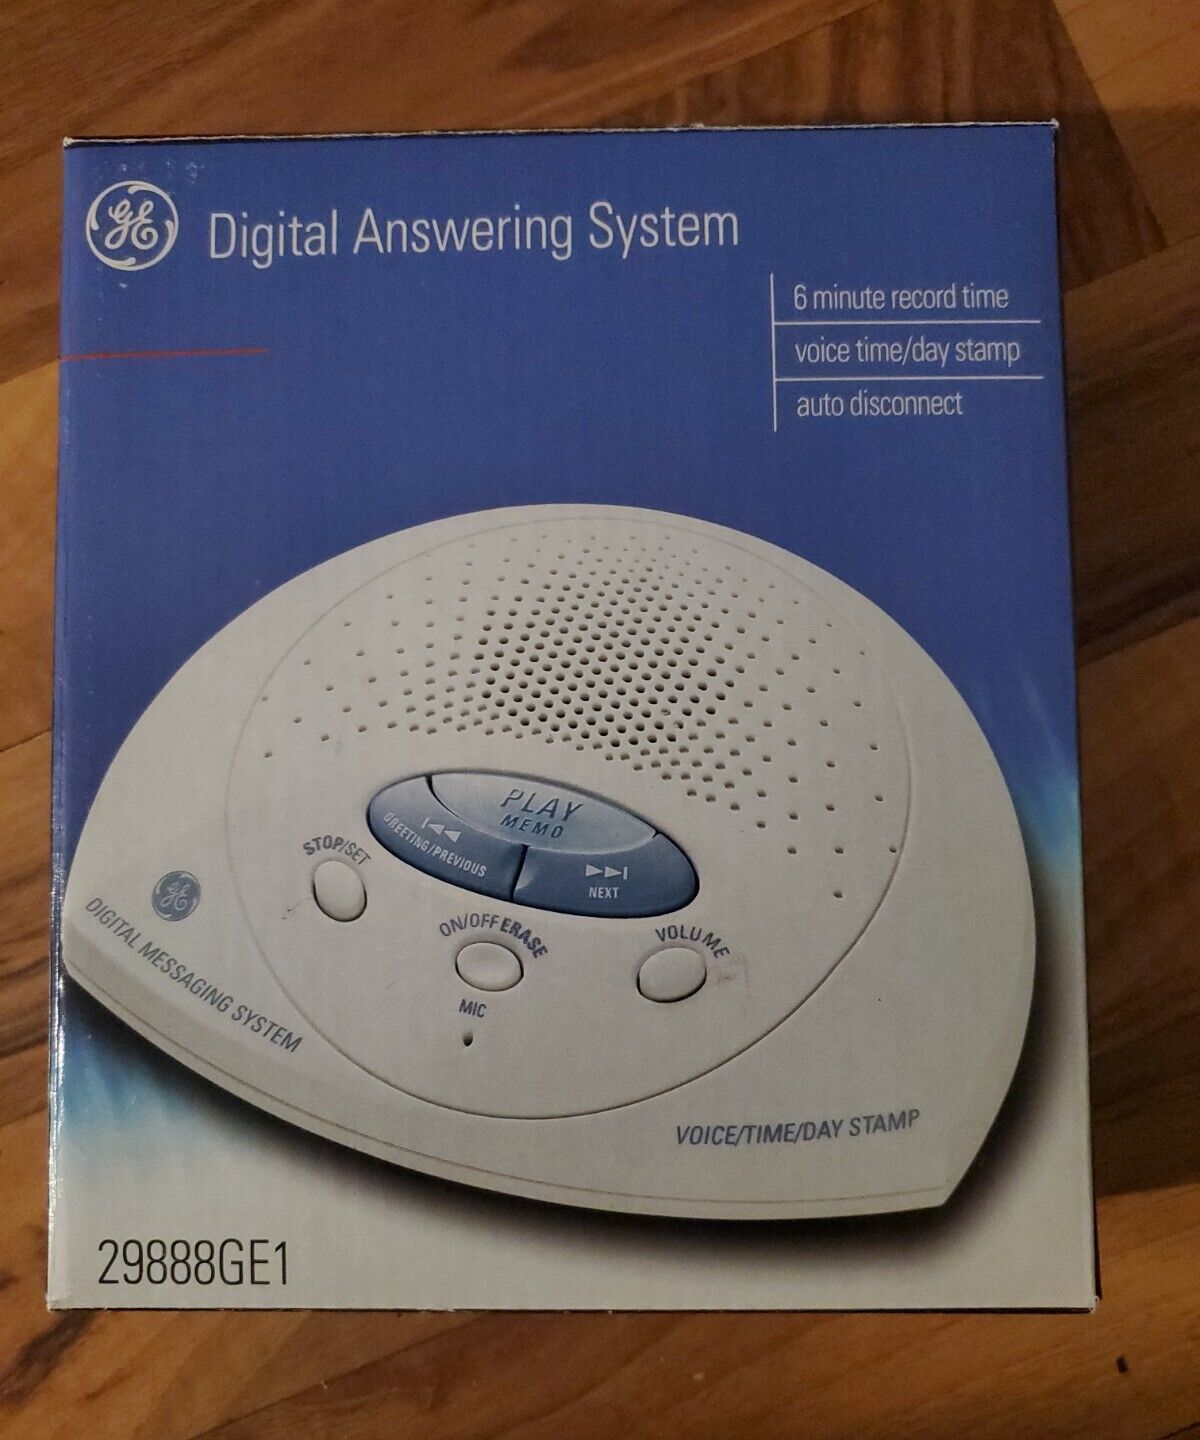 Primary image for GE 29888GE1 Digital Answering System 6 Min Record Time Voice Time/Day Stamp #14